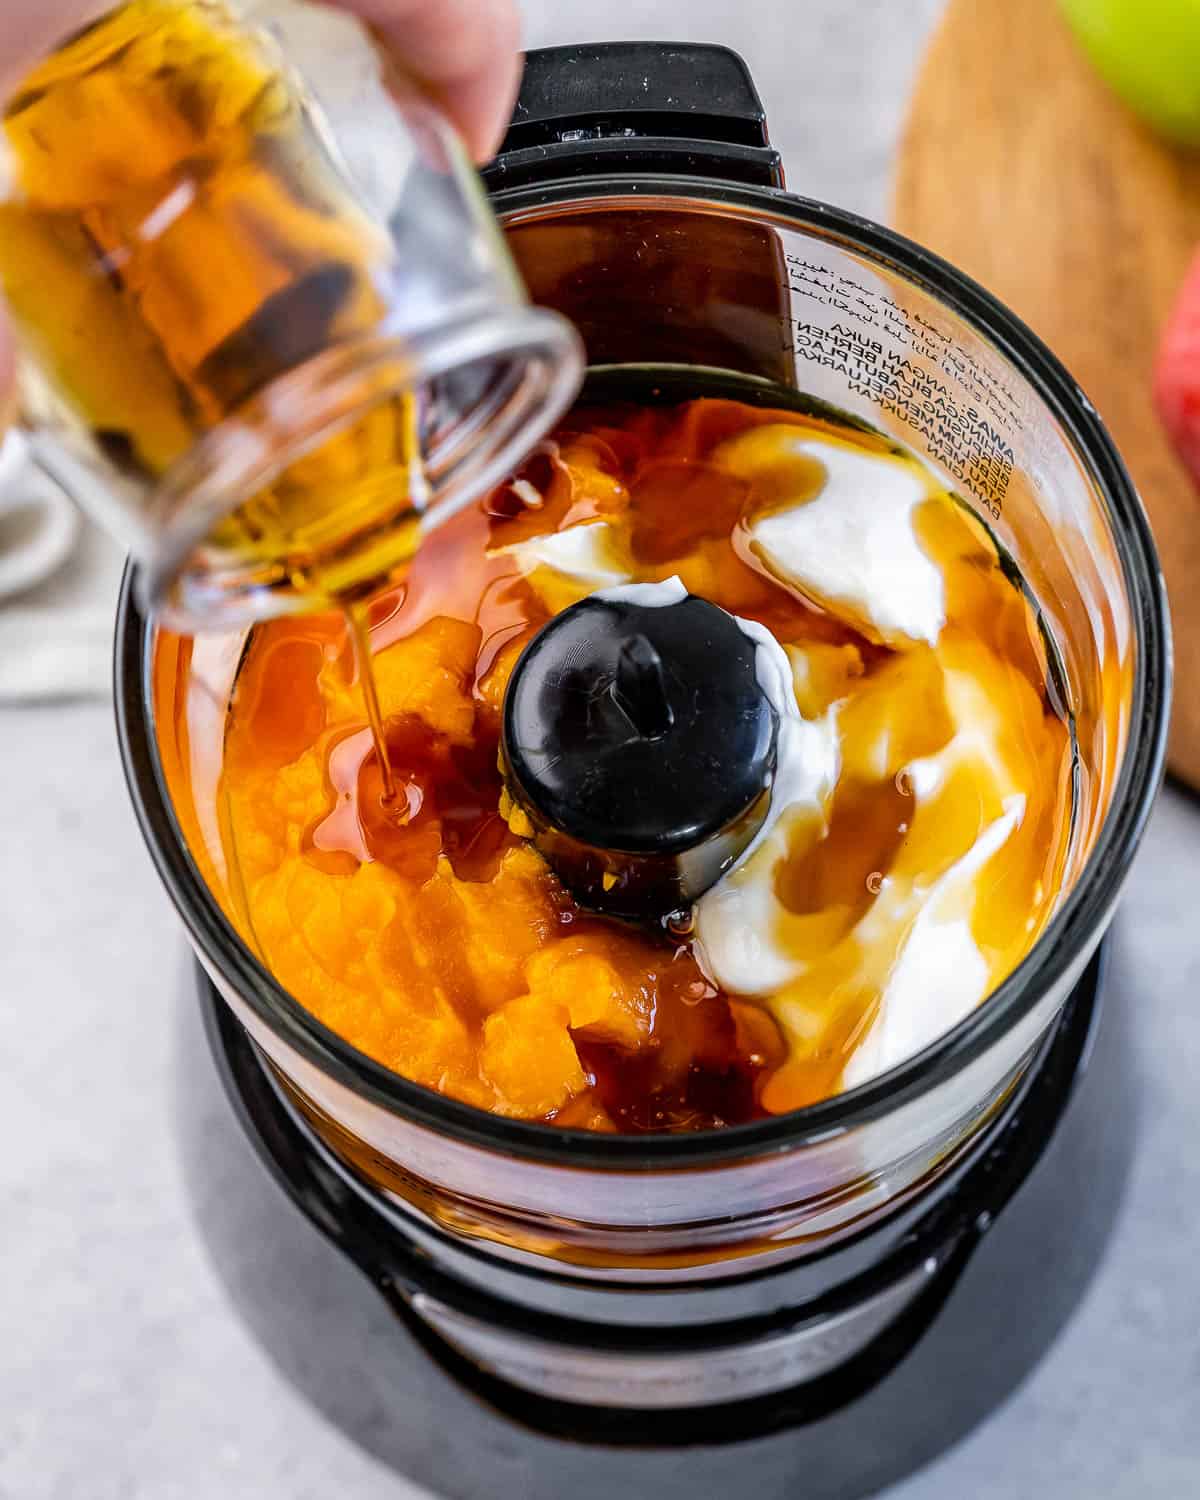 Pouring maple syrup into a food processor with pumpkin and greek yogurt.